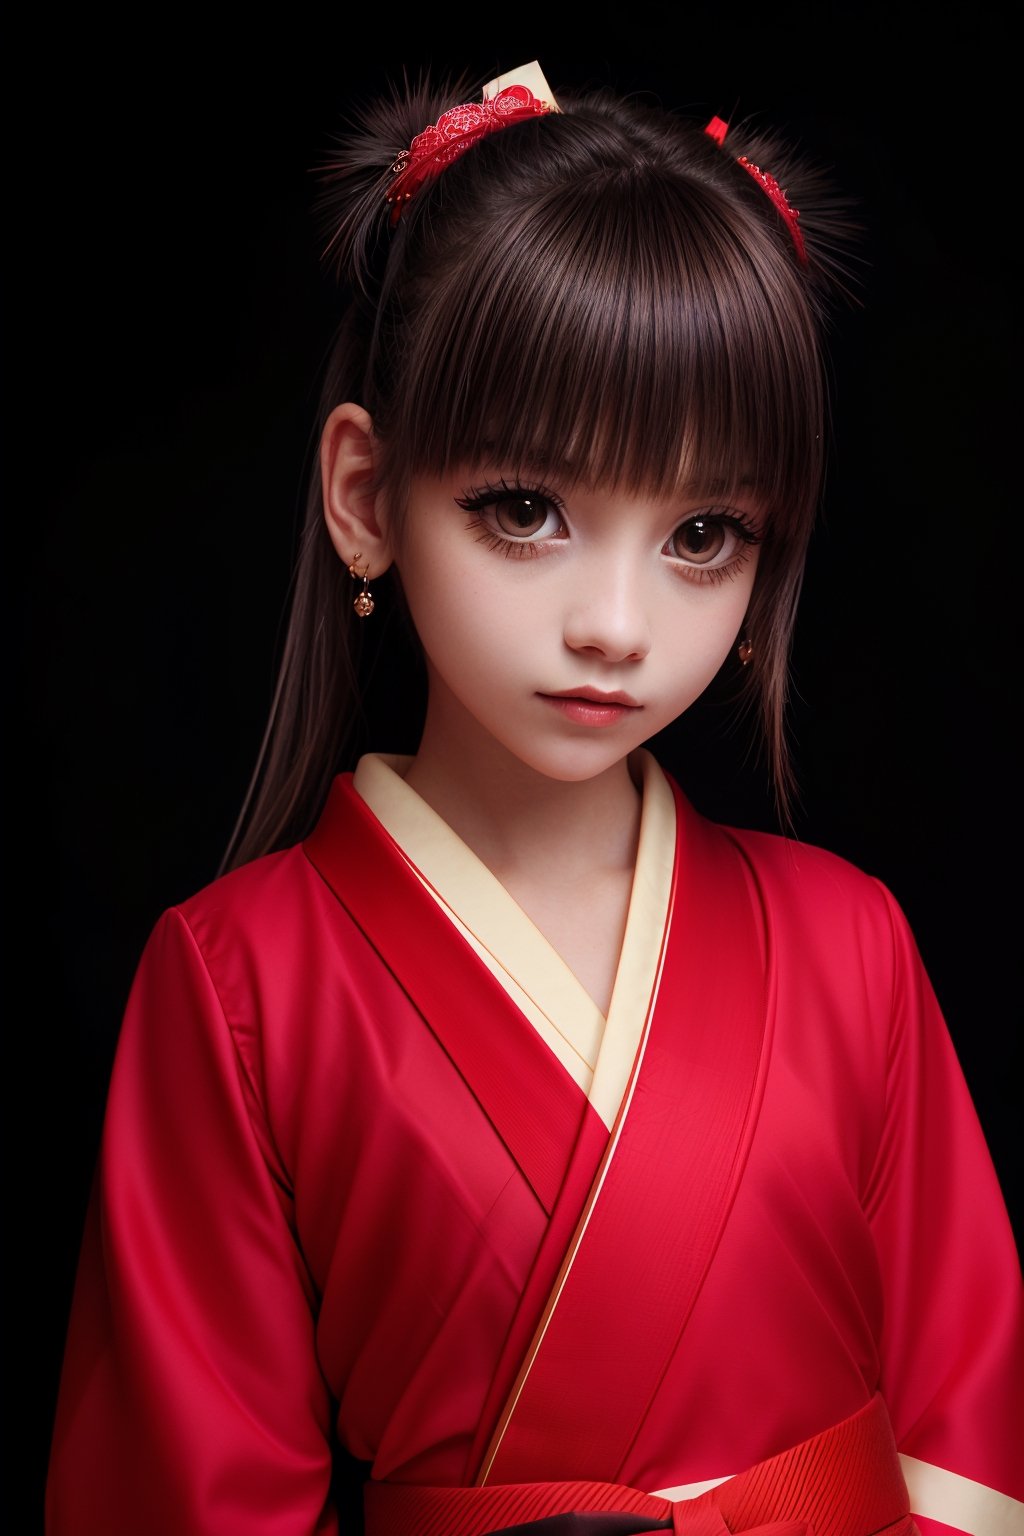 SFW, (masterpiece:1.3), extra resolution, looking at viewer, (distant short:1.1), portrait of beautiful (AIDA_LoRA_LauraB:1.06) in a red (kimono:1.3) dress posing for a picture on black background, adorable girl, pretty face, naughty, funny, happy, cinematic, composition, studio photo, kkw-ph1, hdr, f1.8, getty images, galaxy in her big eyes, big eyes with elegant eyelashes, open eyes, black background, simple background, isolated on black, skin like a tree bark, skin like a paper, in style of AIDA_NH_humans, by AIDA_NH_humans,AIDA_NH_humans